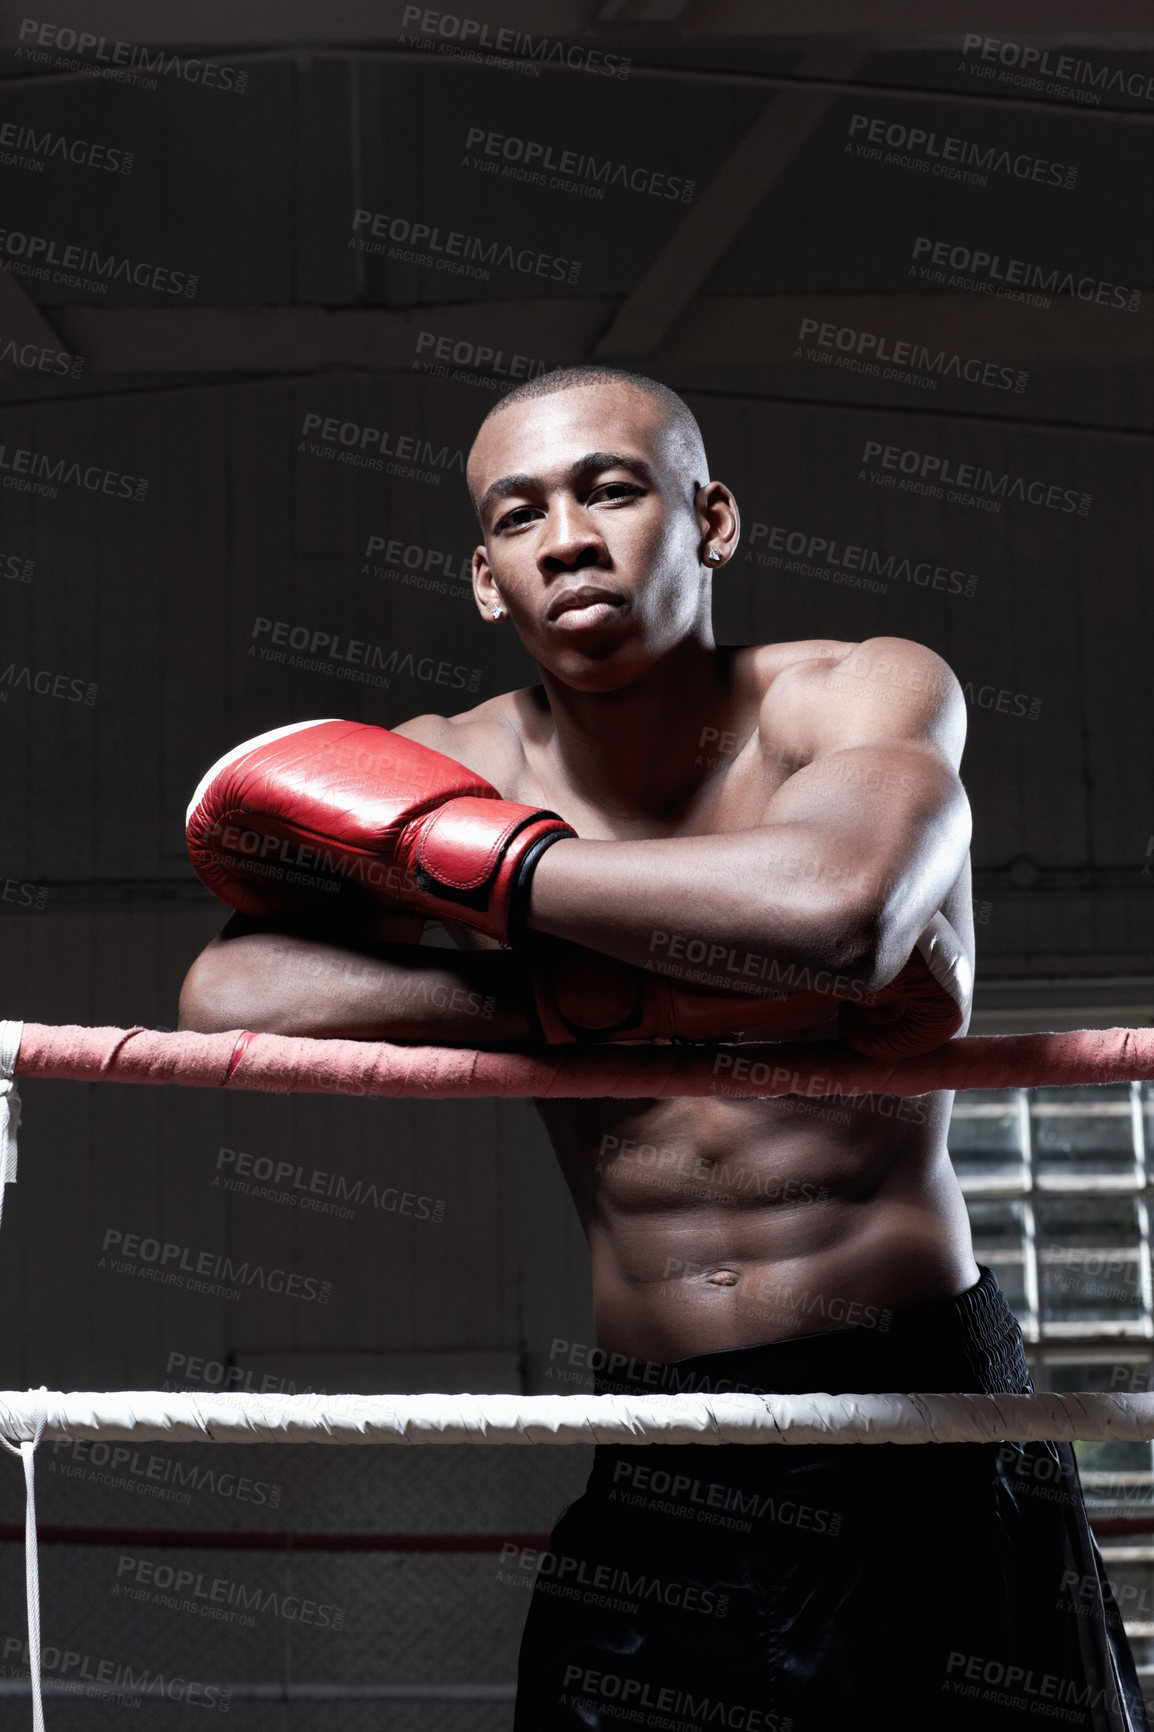 Buy stock photo Portrait of male African American boxer standing in ring